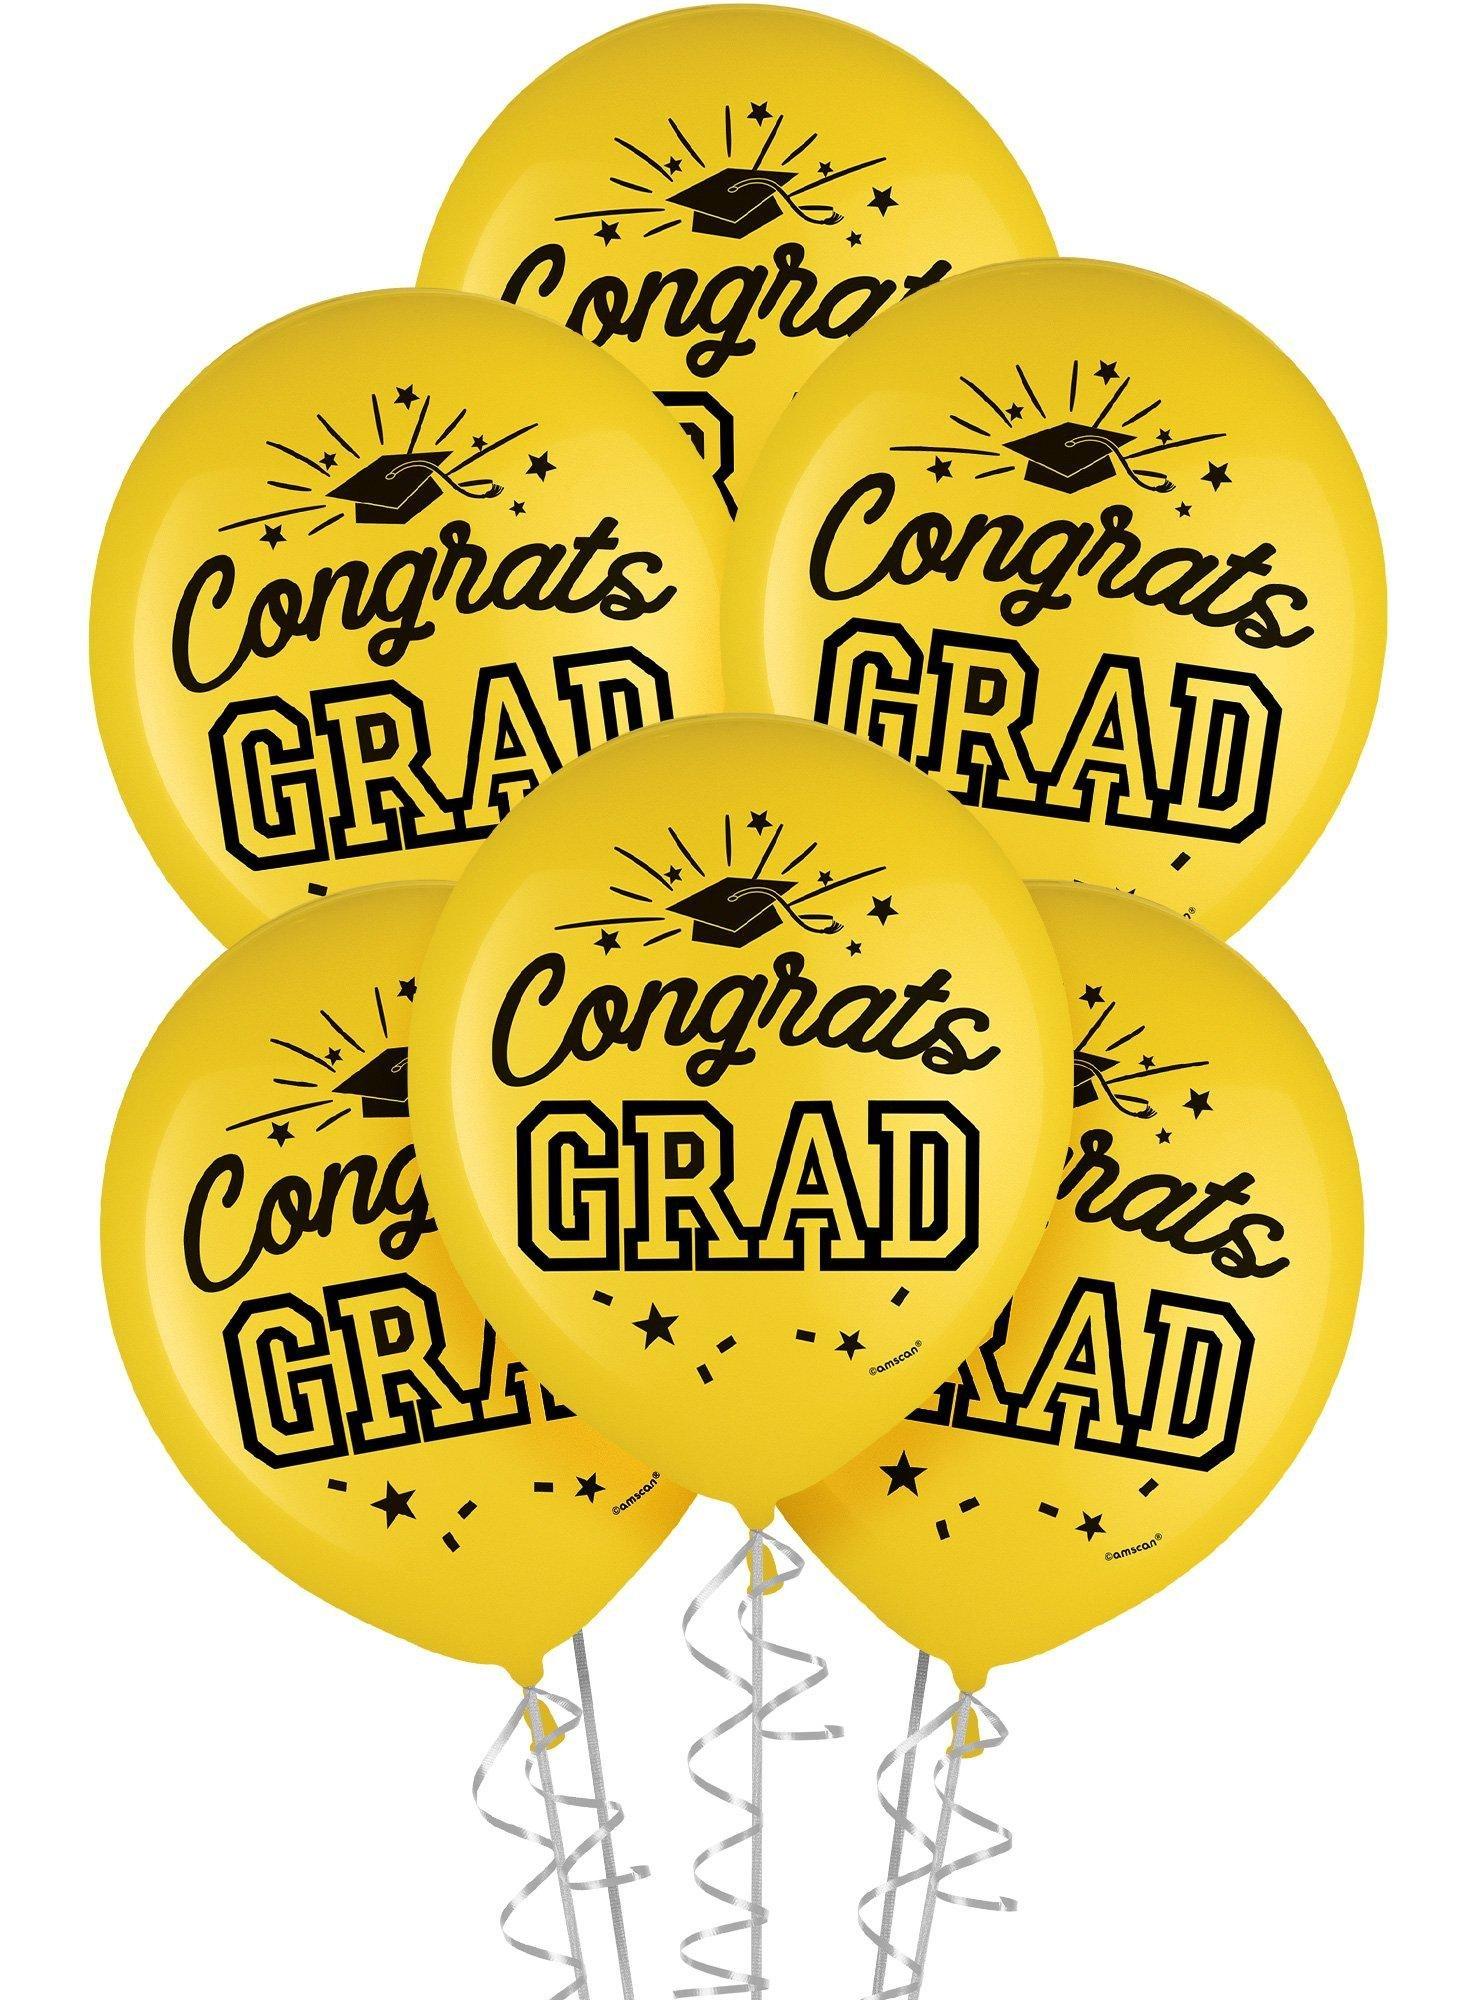 Graduation Party Supplies Kit for 60 with Decorations, Banners, Balloons, Plates, Napkins - Yellow Congrats Grad